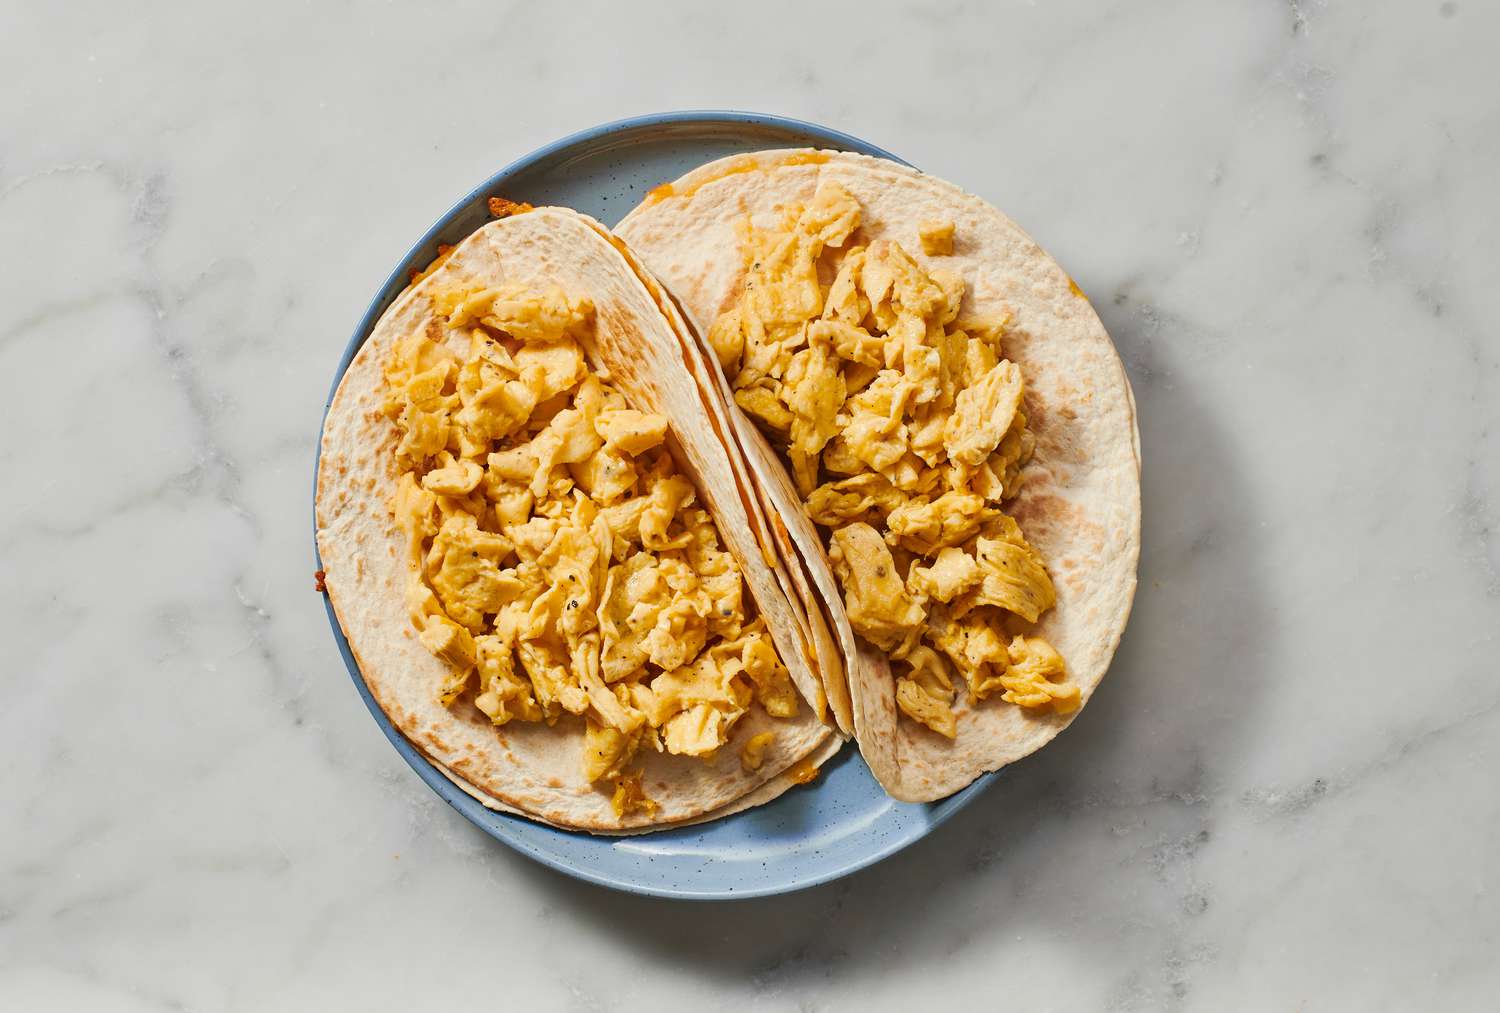 Two quesadillas topped with scrambled eggs